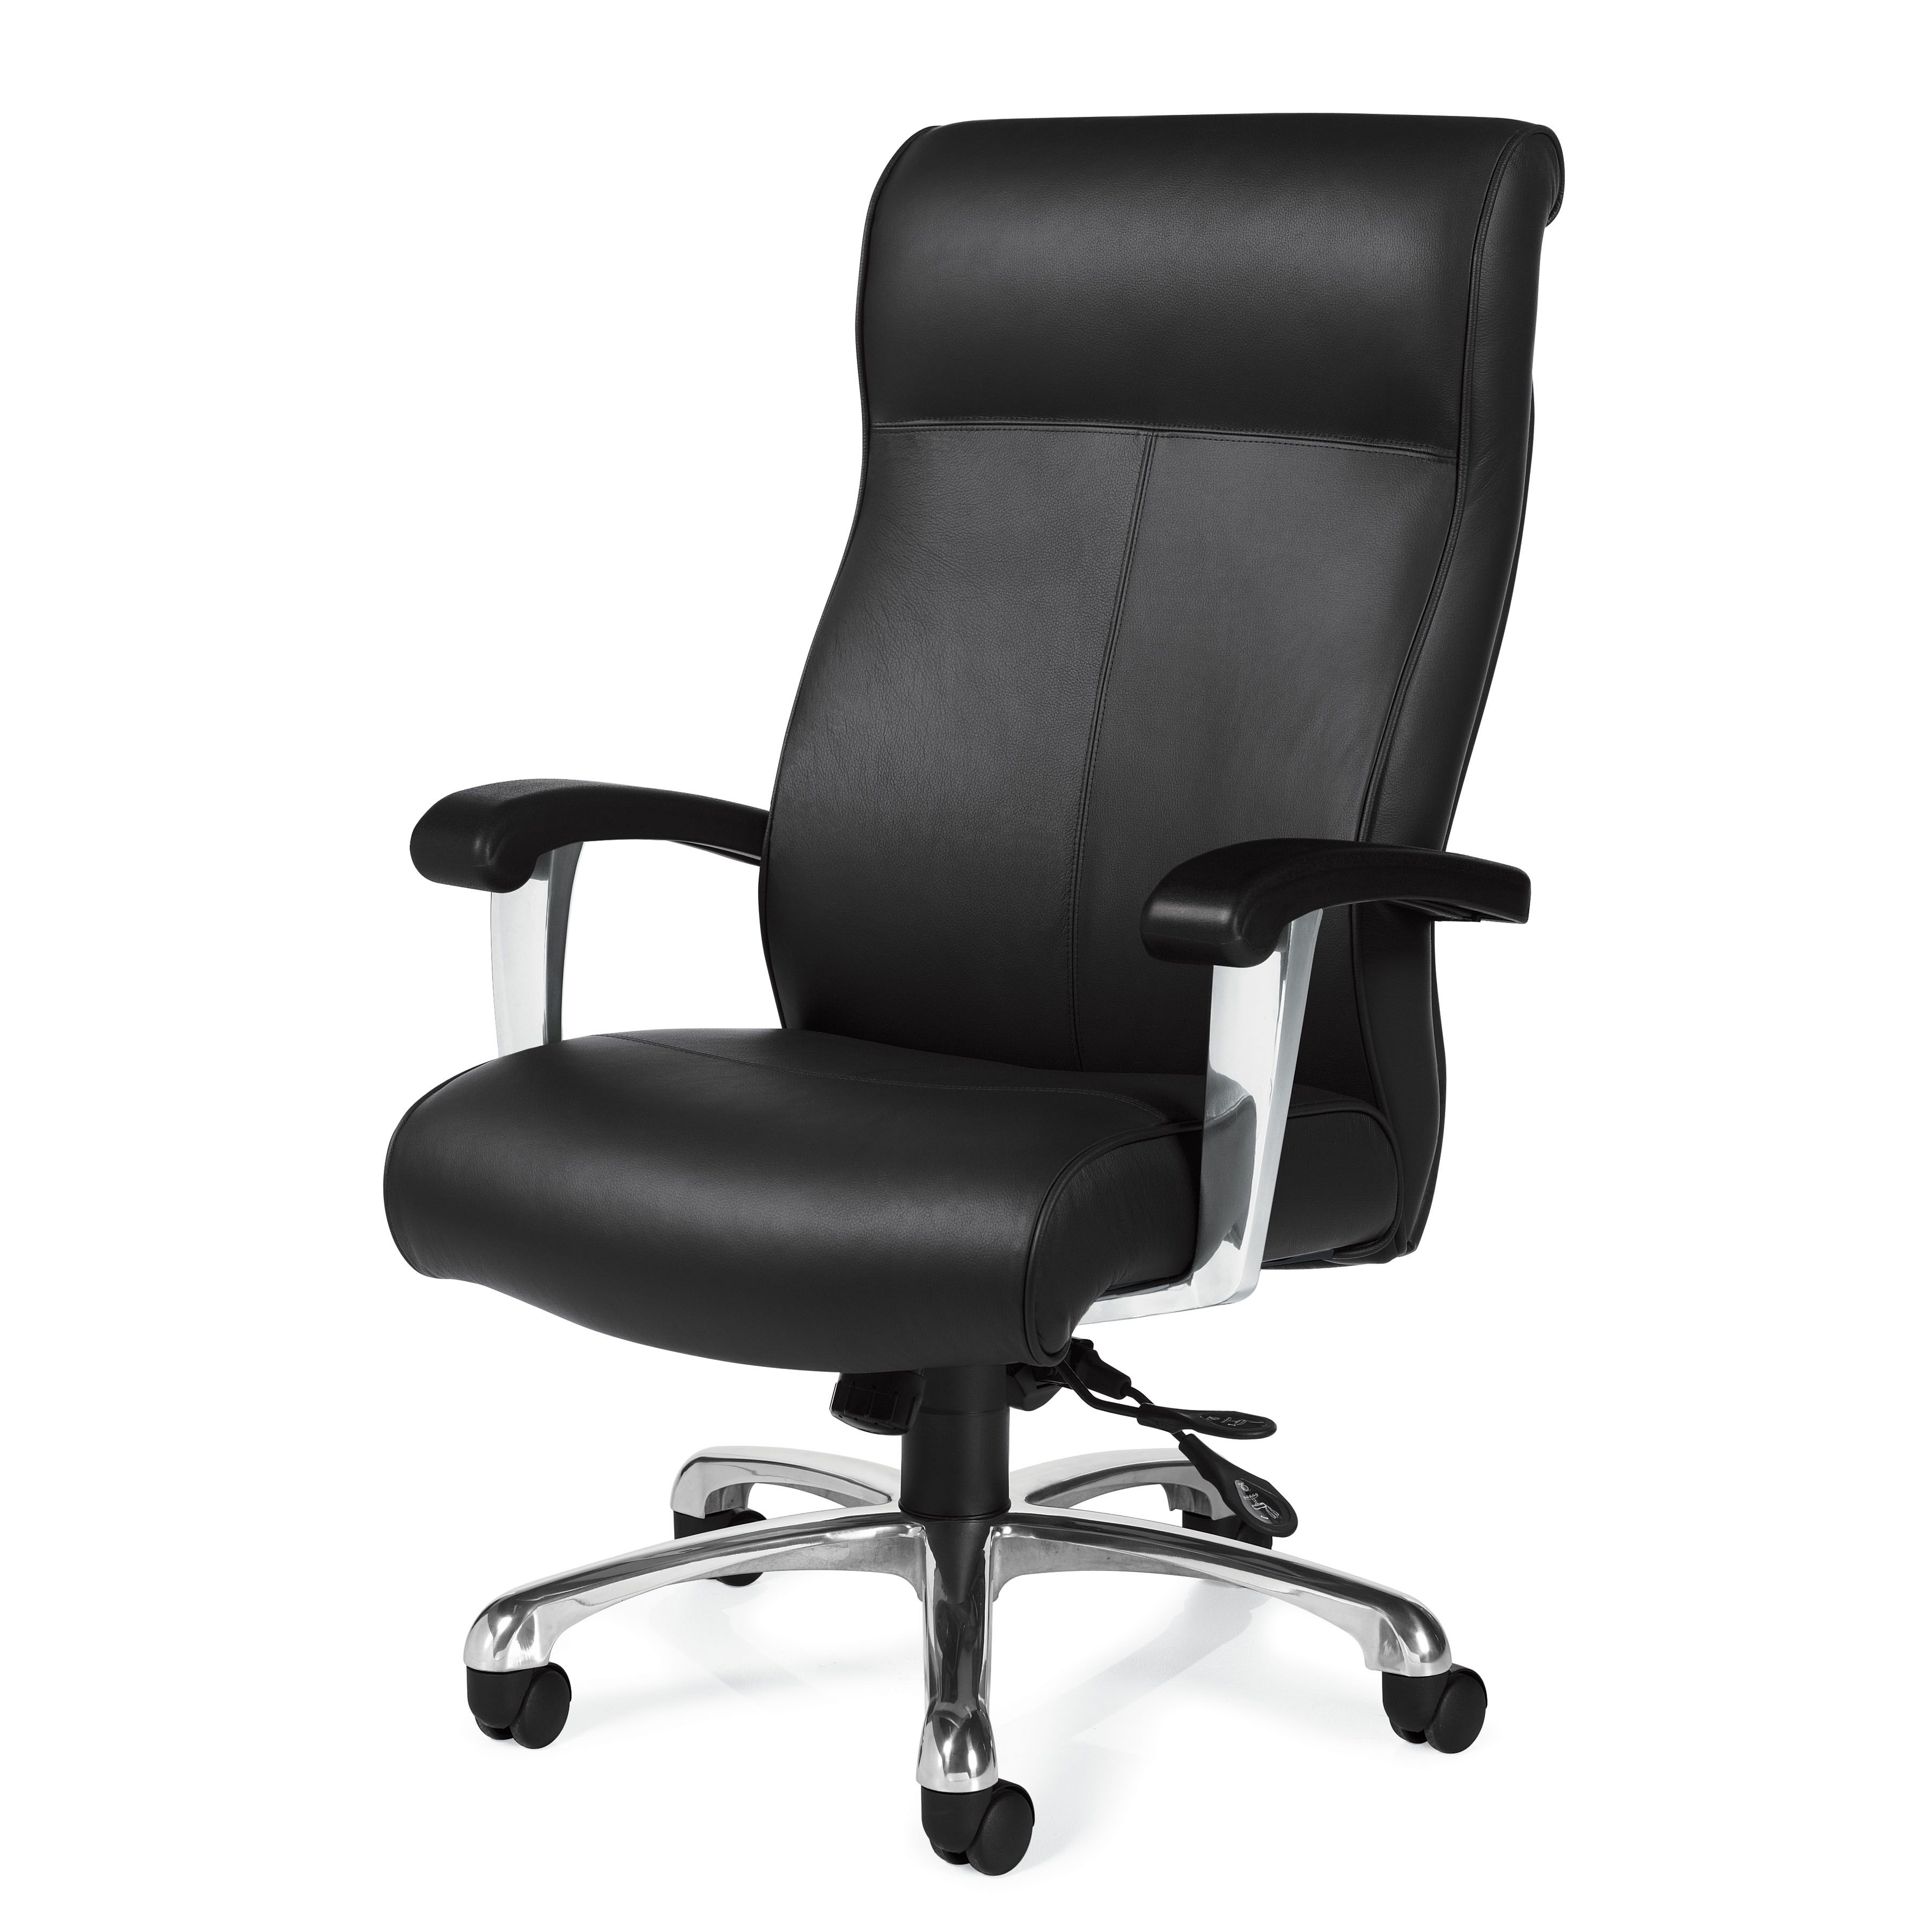 Global Furniture Group Pertaining To Plush Executive Office Chairs (View 11 of 20)